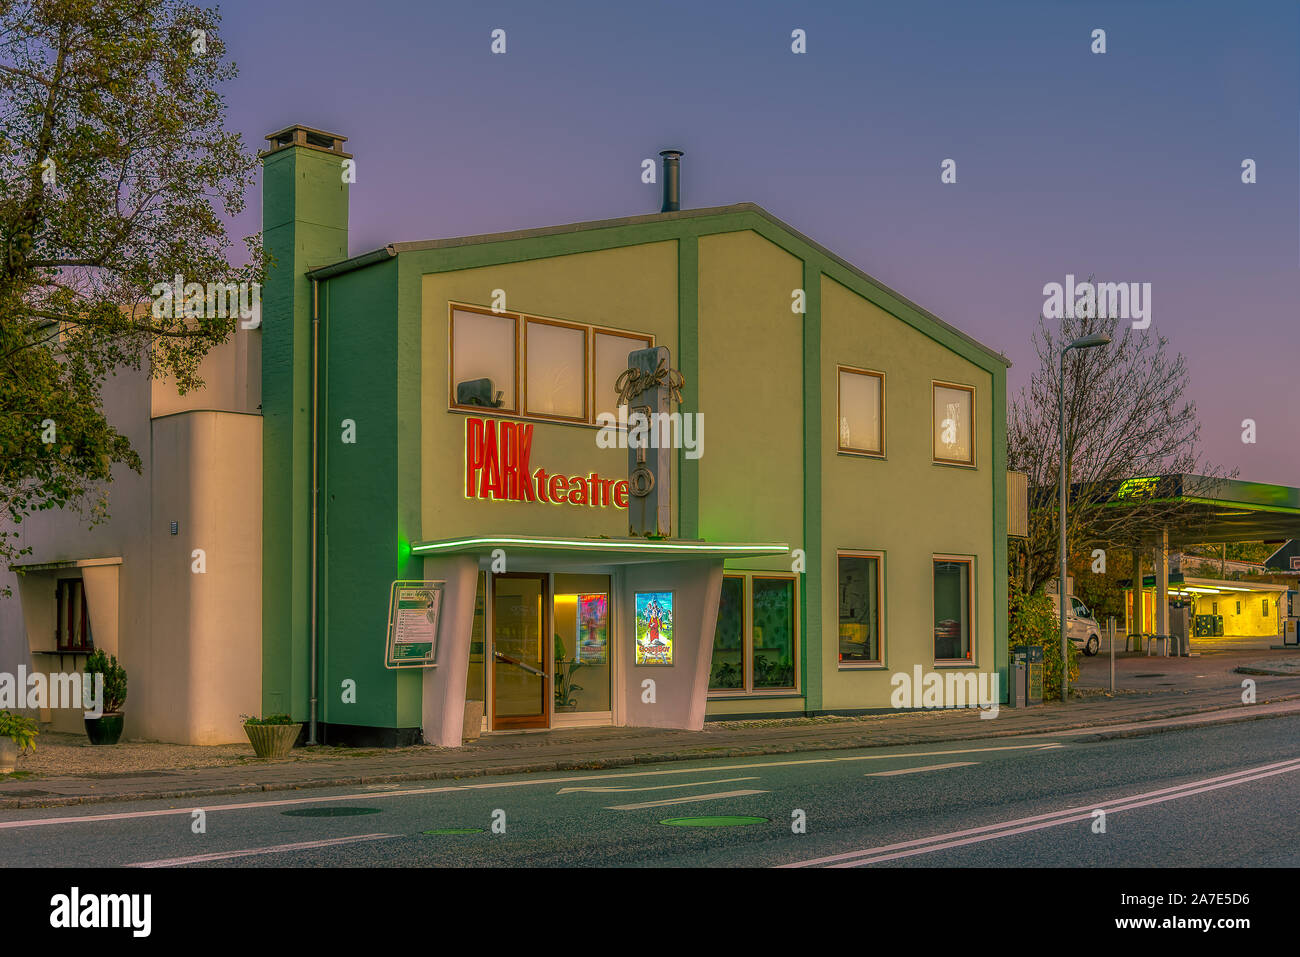 Danish vitage design at a green old retro theatre in the evening light in the small town of Frederikssund, Denmark, October 29, 2019 Stock Photo